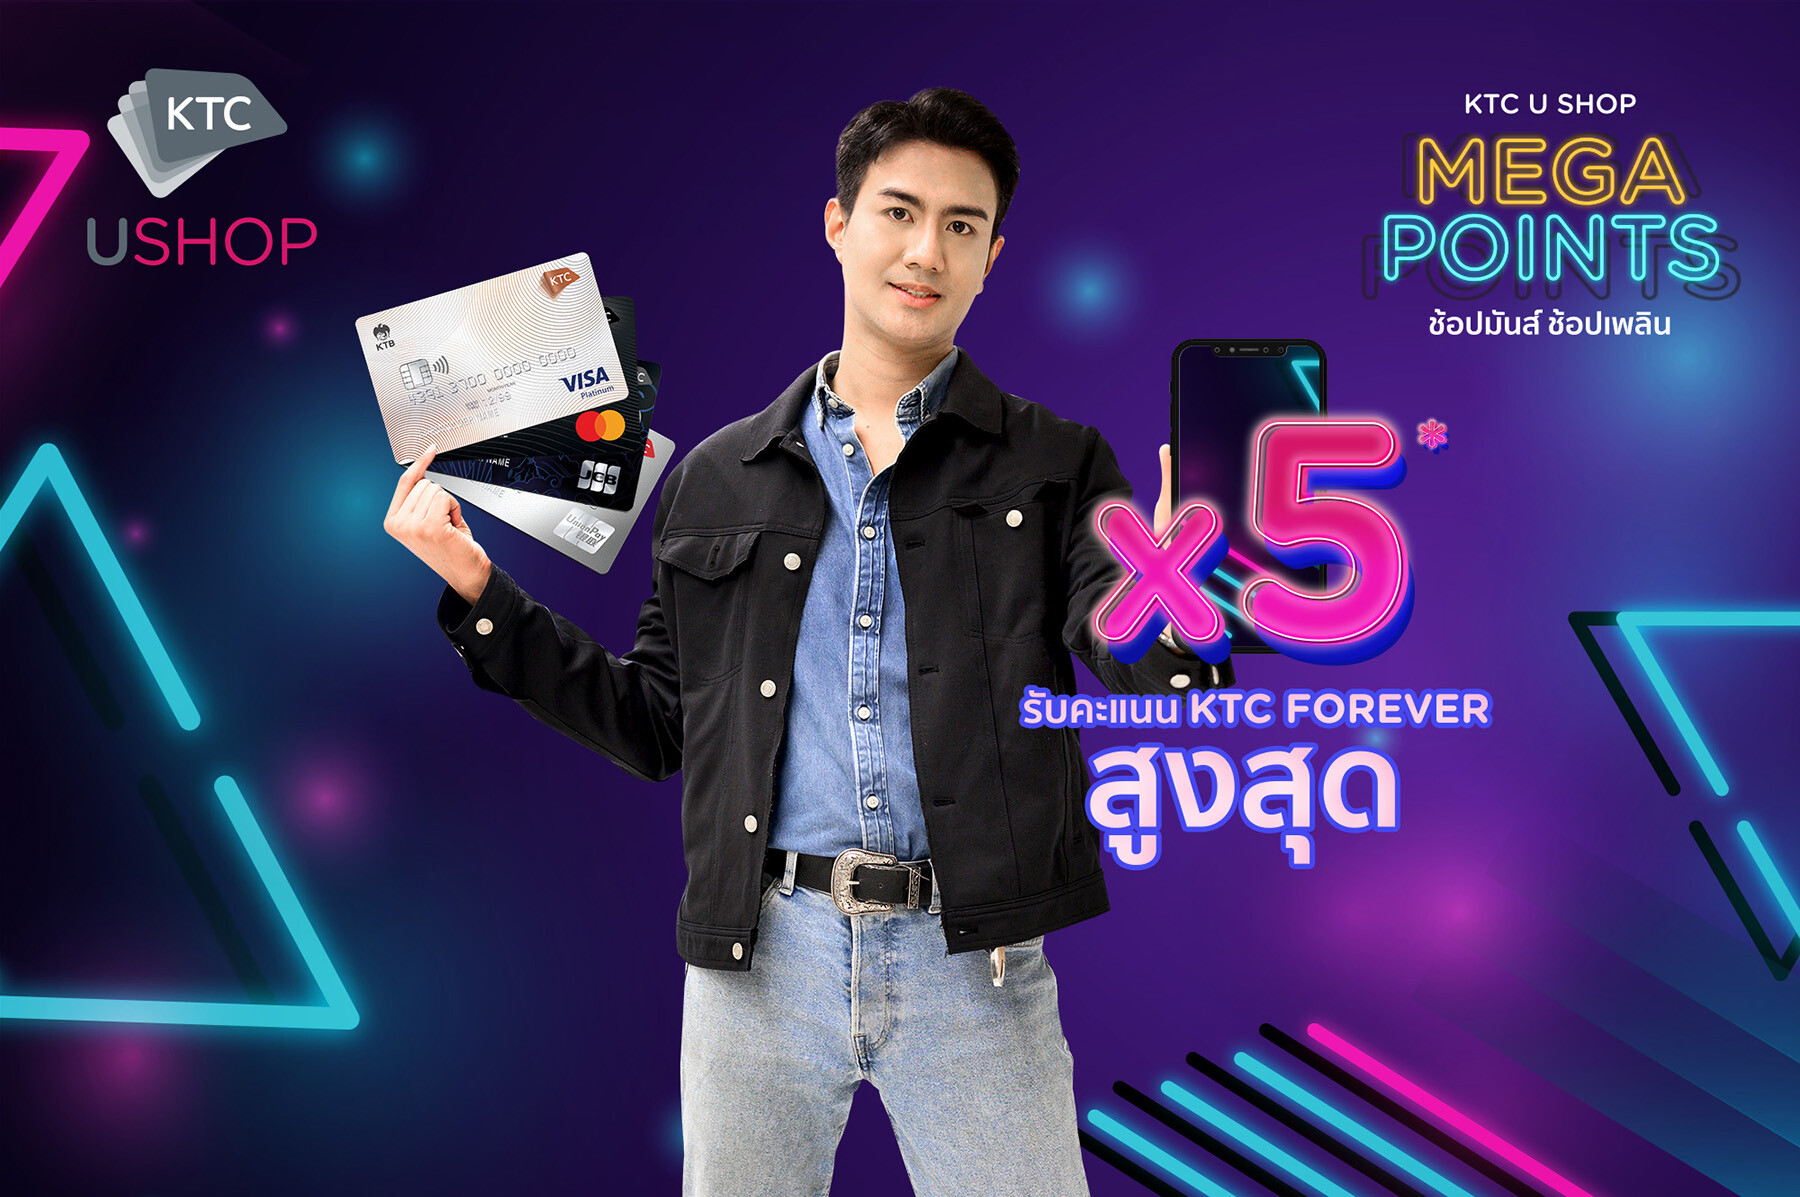 KTC invites cardmembers to shop high-quality products at KTC U SHOP and enjoy up to 5x points